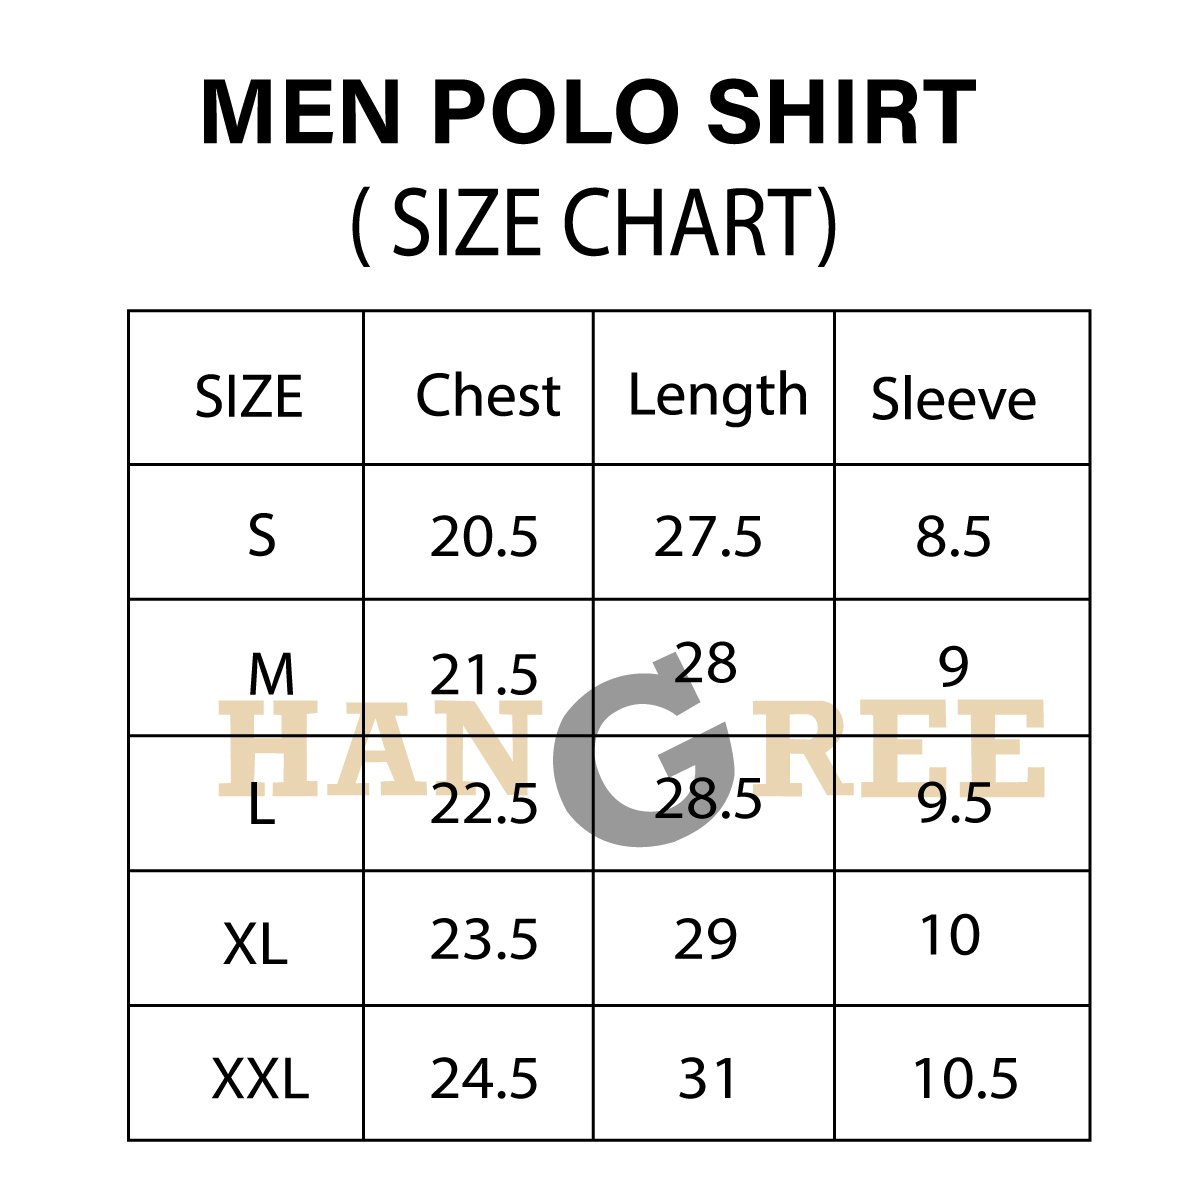 Classy White Polo Shirt : Buy Online At Best Prices In Pakistan | Bucket.pk